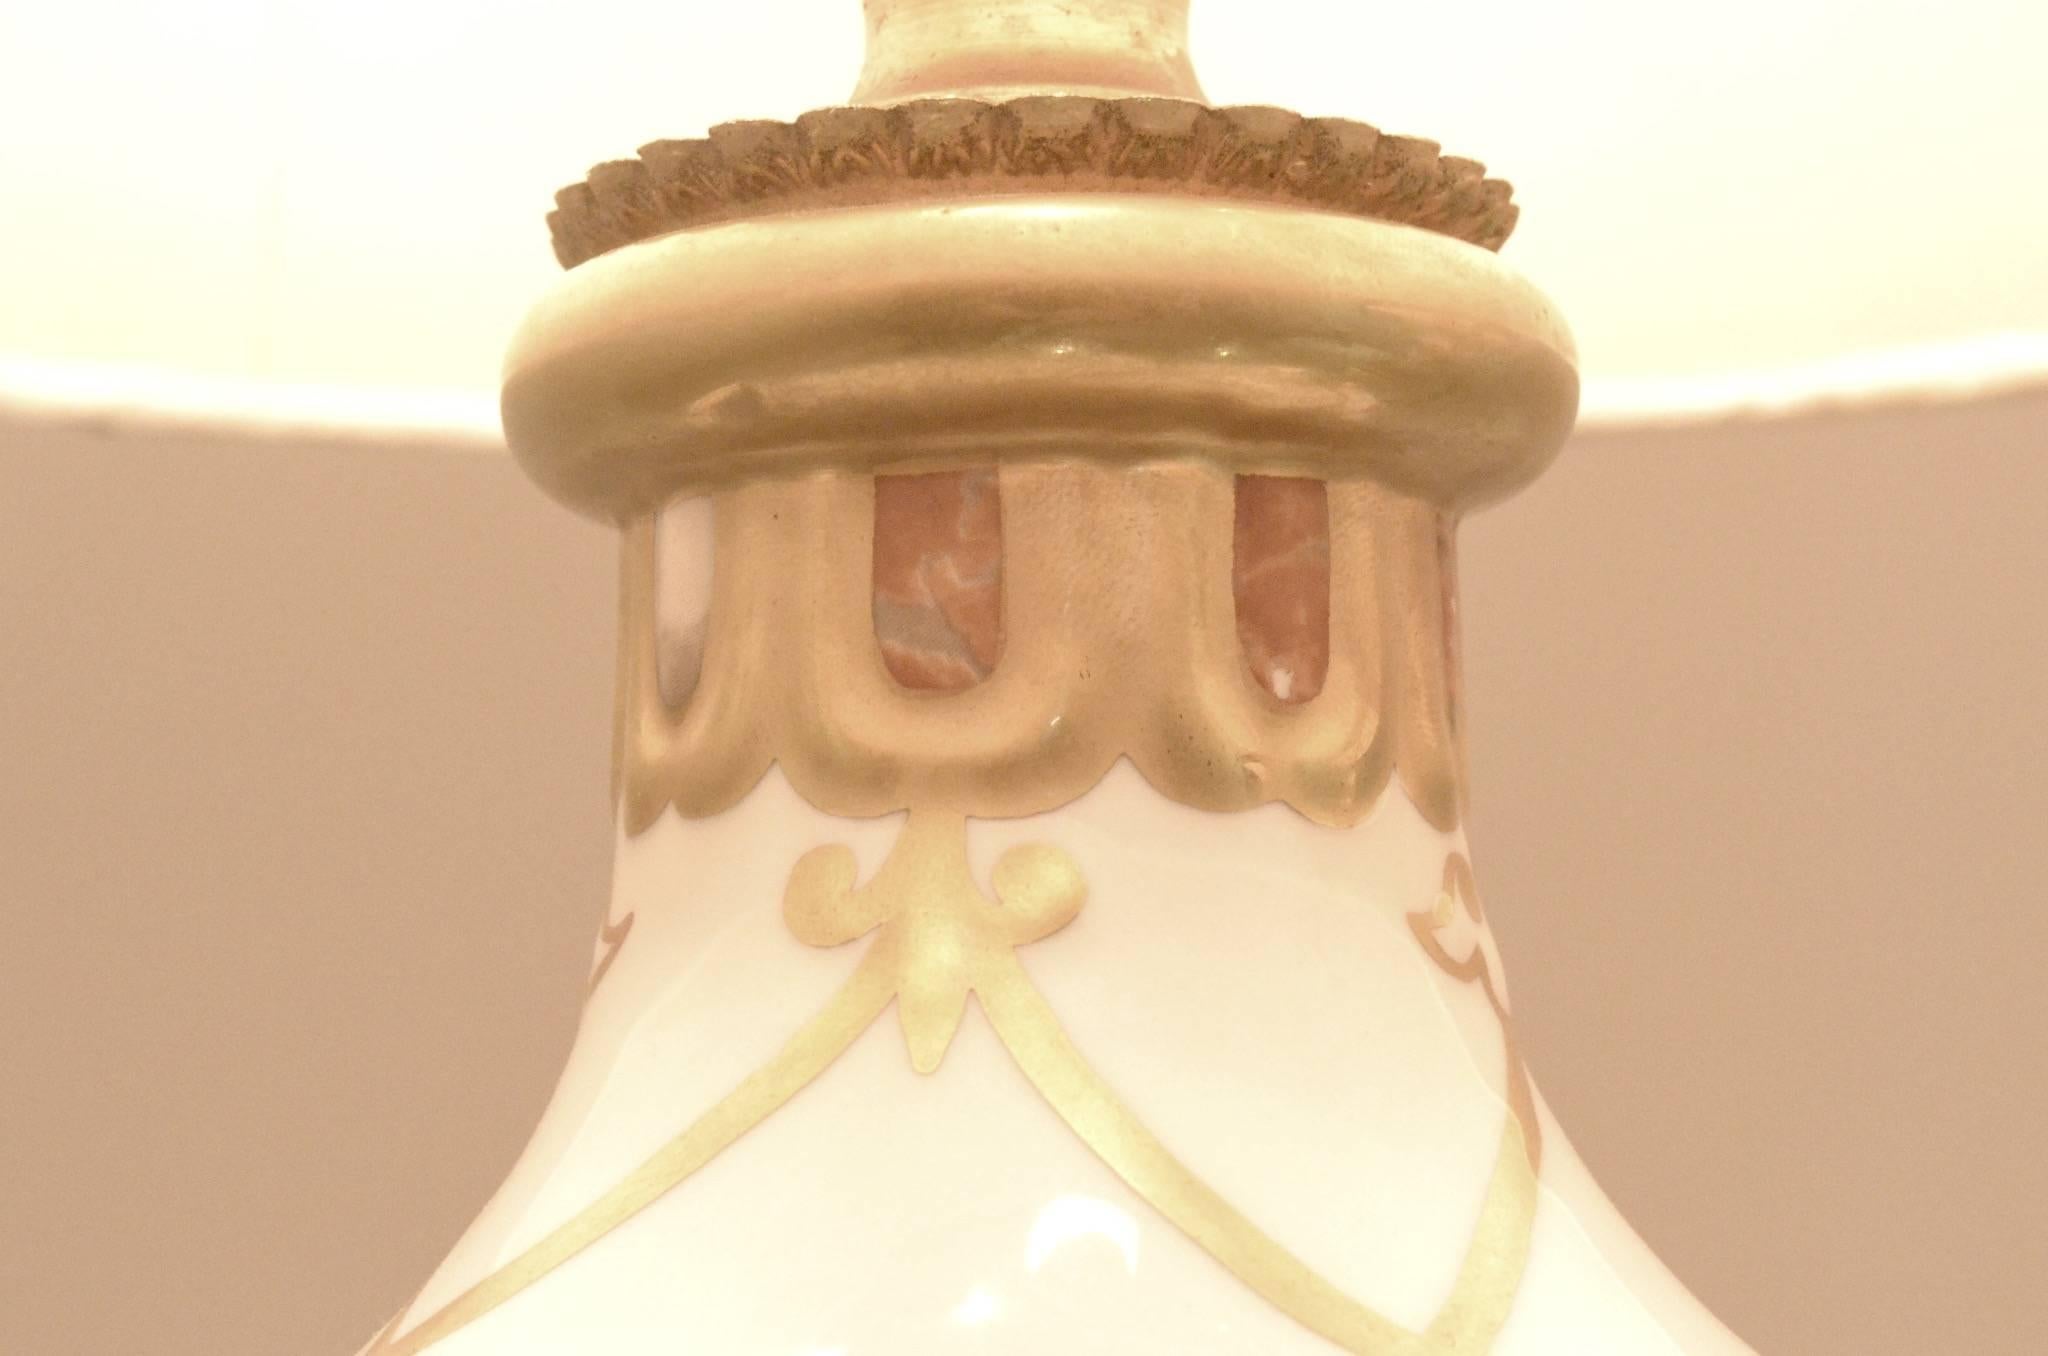 Pair of French Table Lamps in Bronze and Porcelain by Manufacture De Sèvres im Zustand „Hervorragend“ im Angebot in Brussels, Ixelles